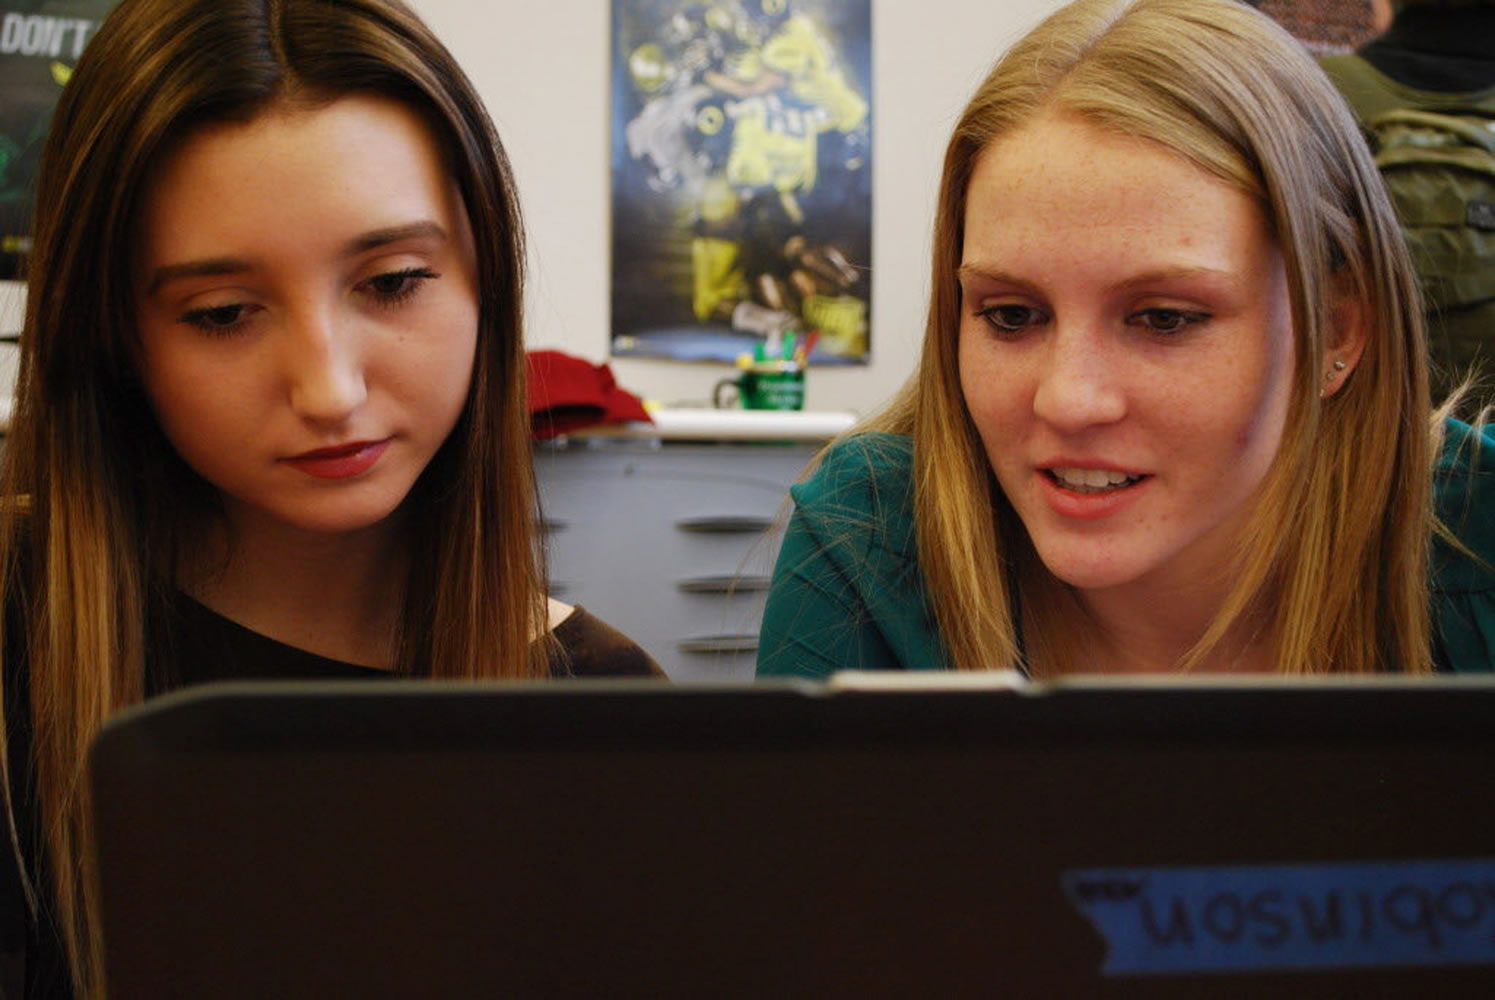 Beaverton High School Social Media teammates Paige Colorito, left, and Casey Wise work on a story about the Beaverton Police Department, in Beaverton, Ore.